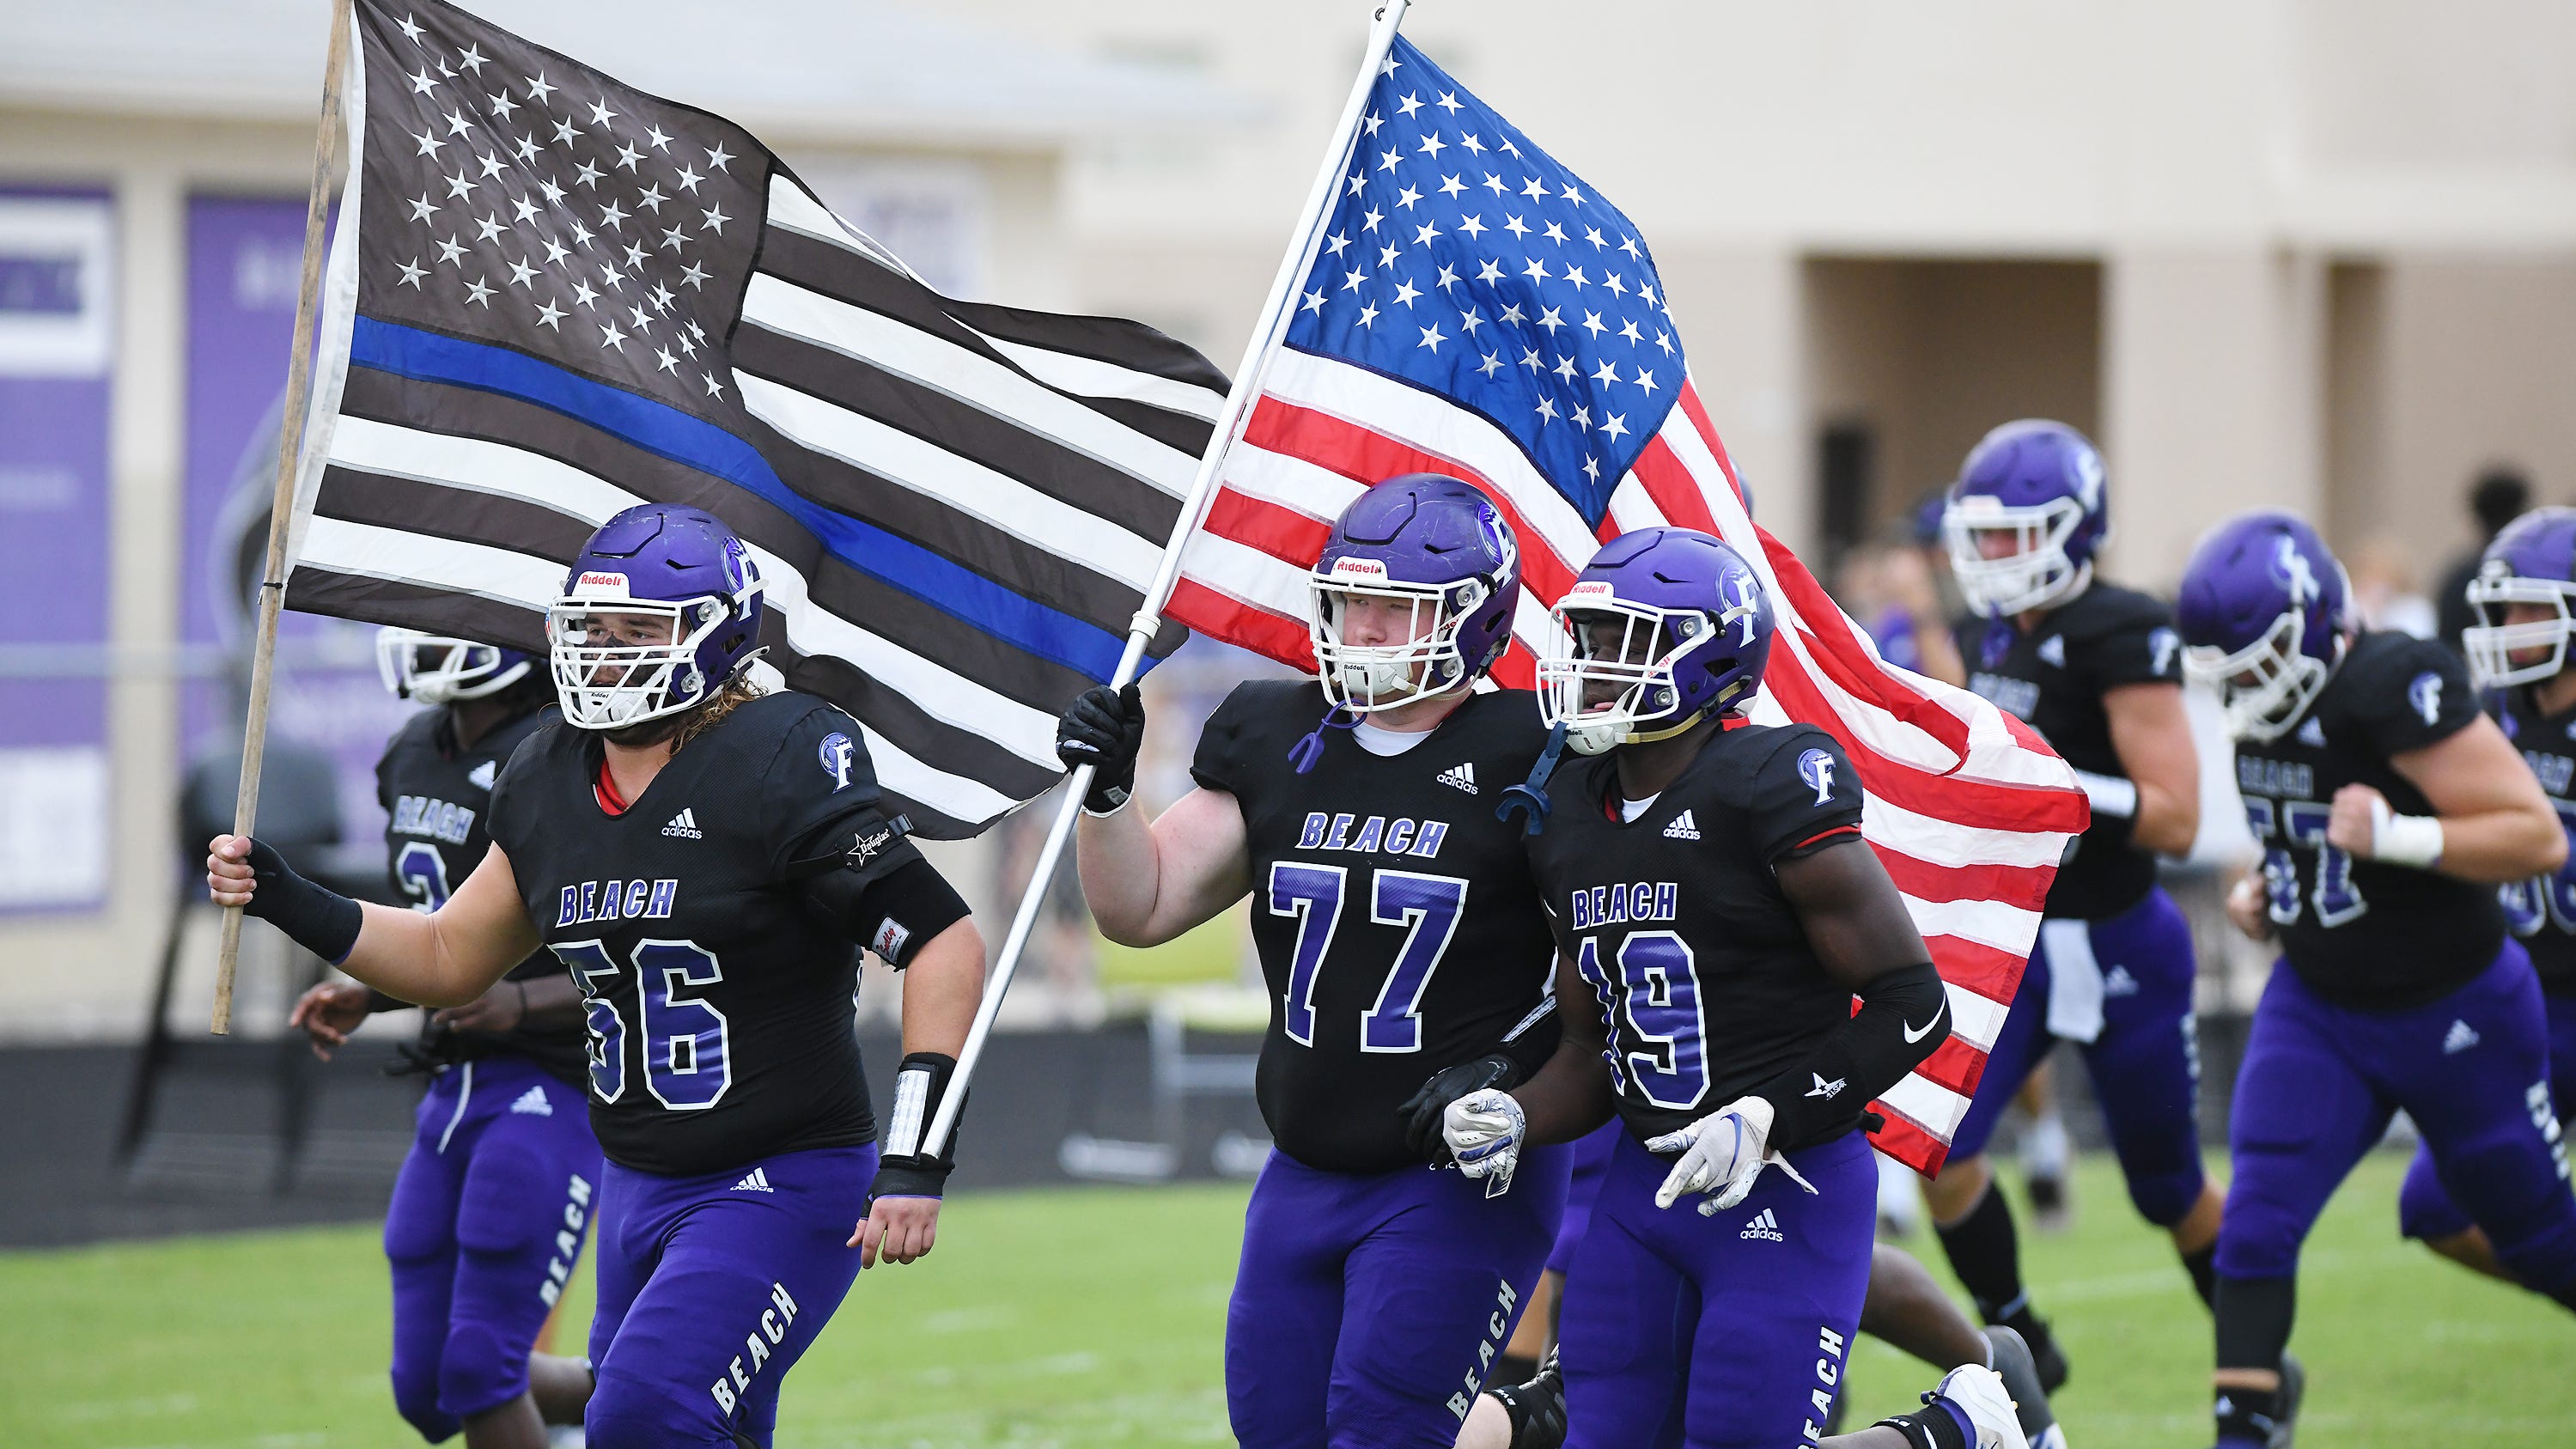 Fletcher High School bans police remembrance flag after controversy